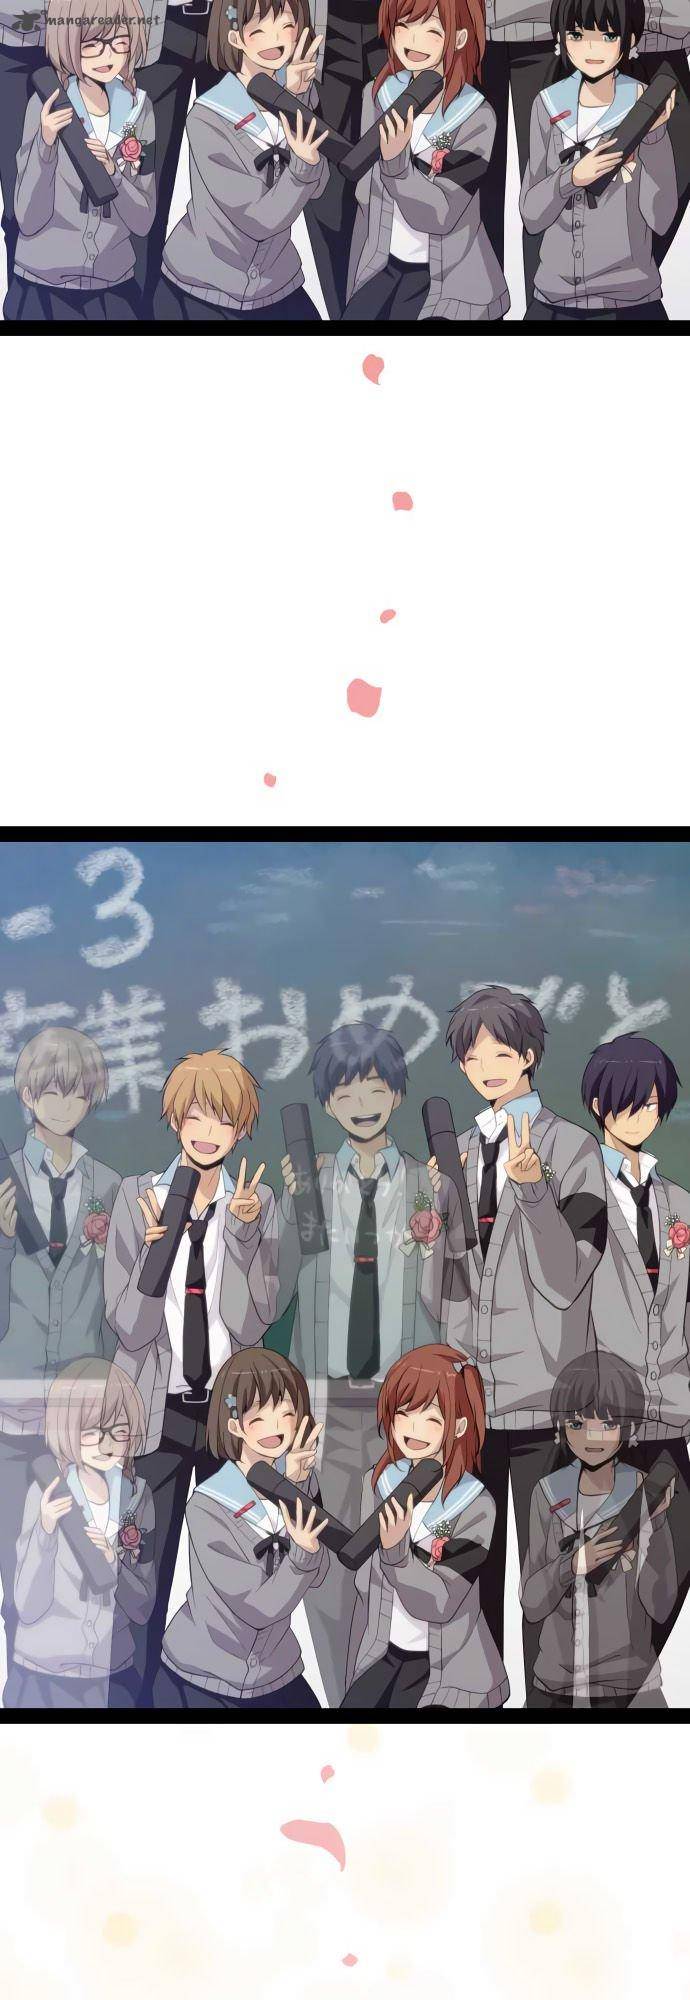 Relife 212 12